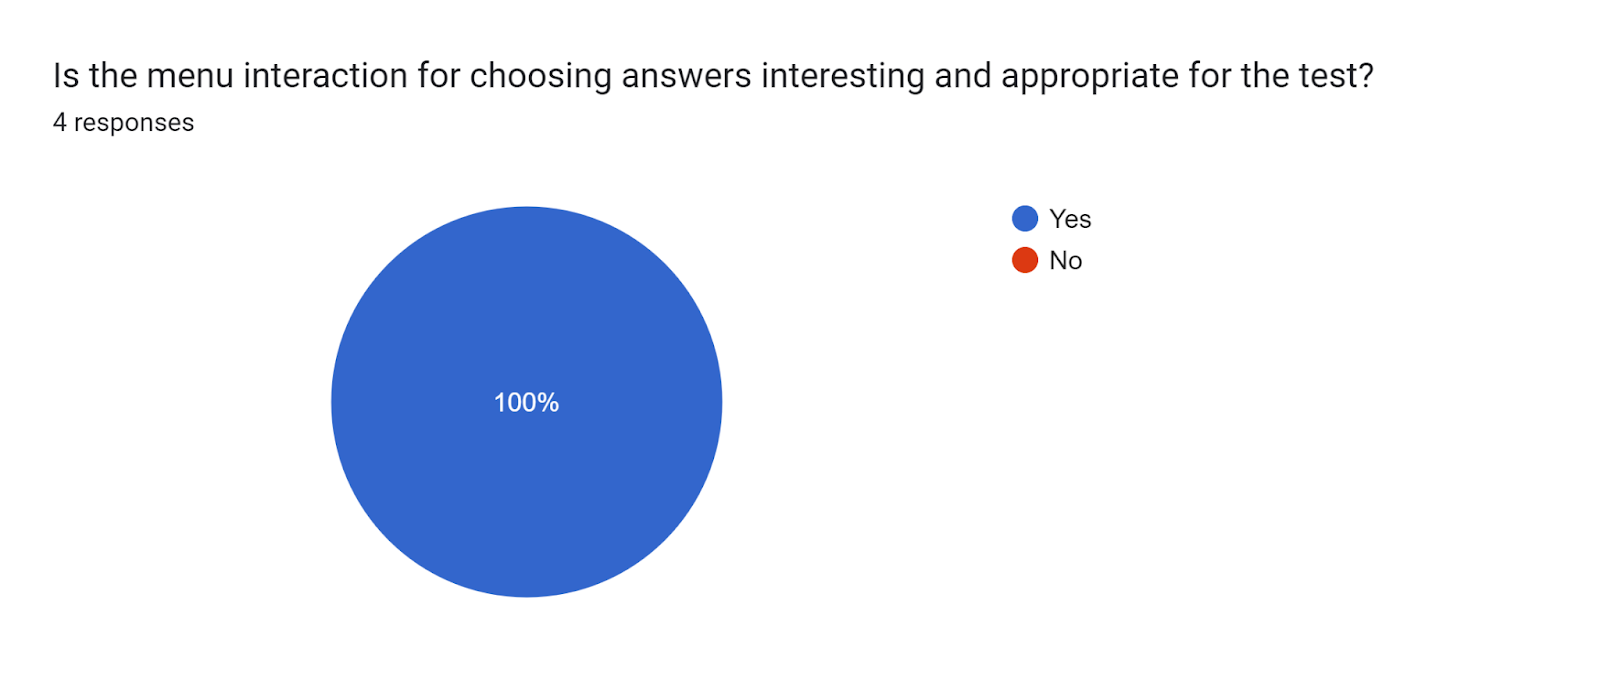 Forms response chart. Question title: Is the menu interaction for choosing answers interesting and appropriate for the test?. Number of responses: 4 responses.